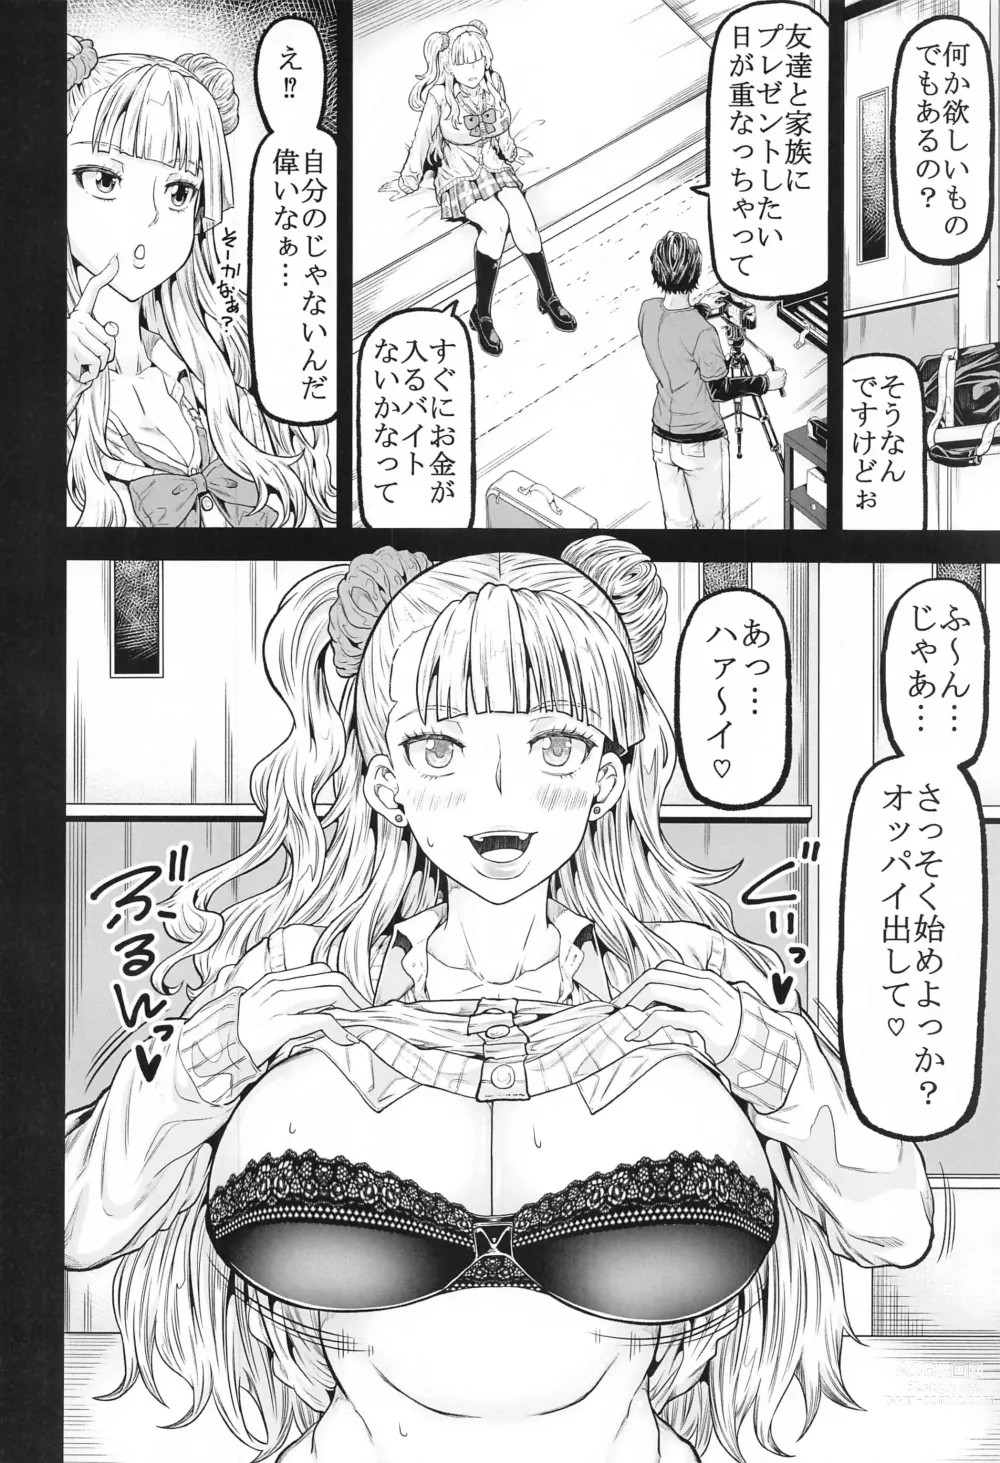 Page 3 of doujinshi gals works